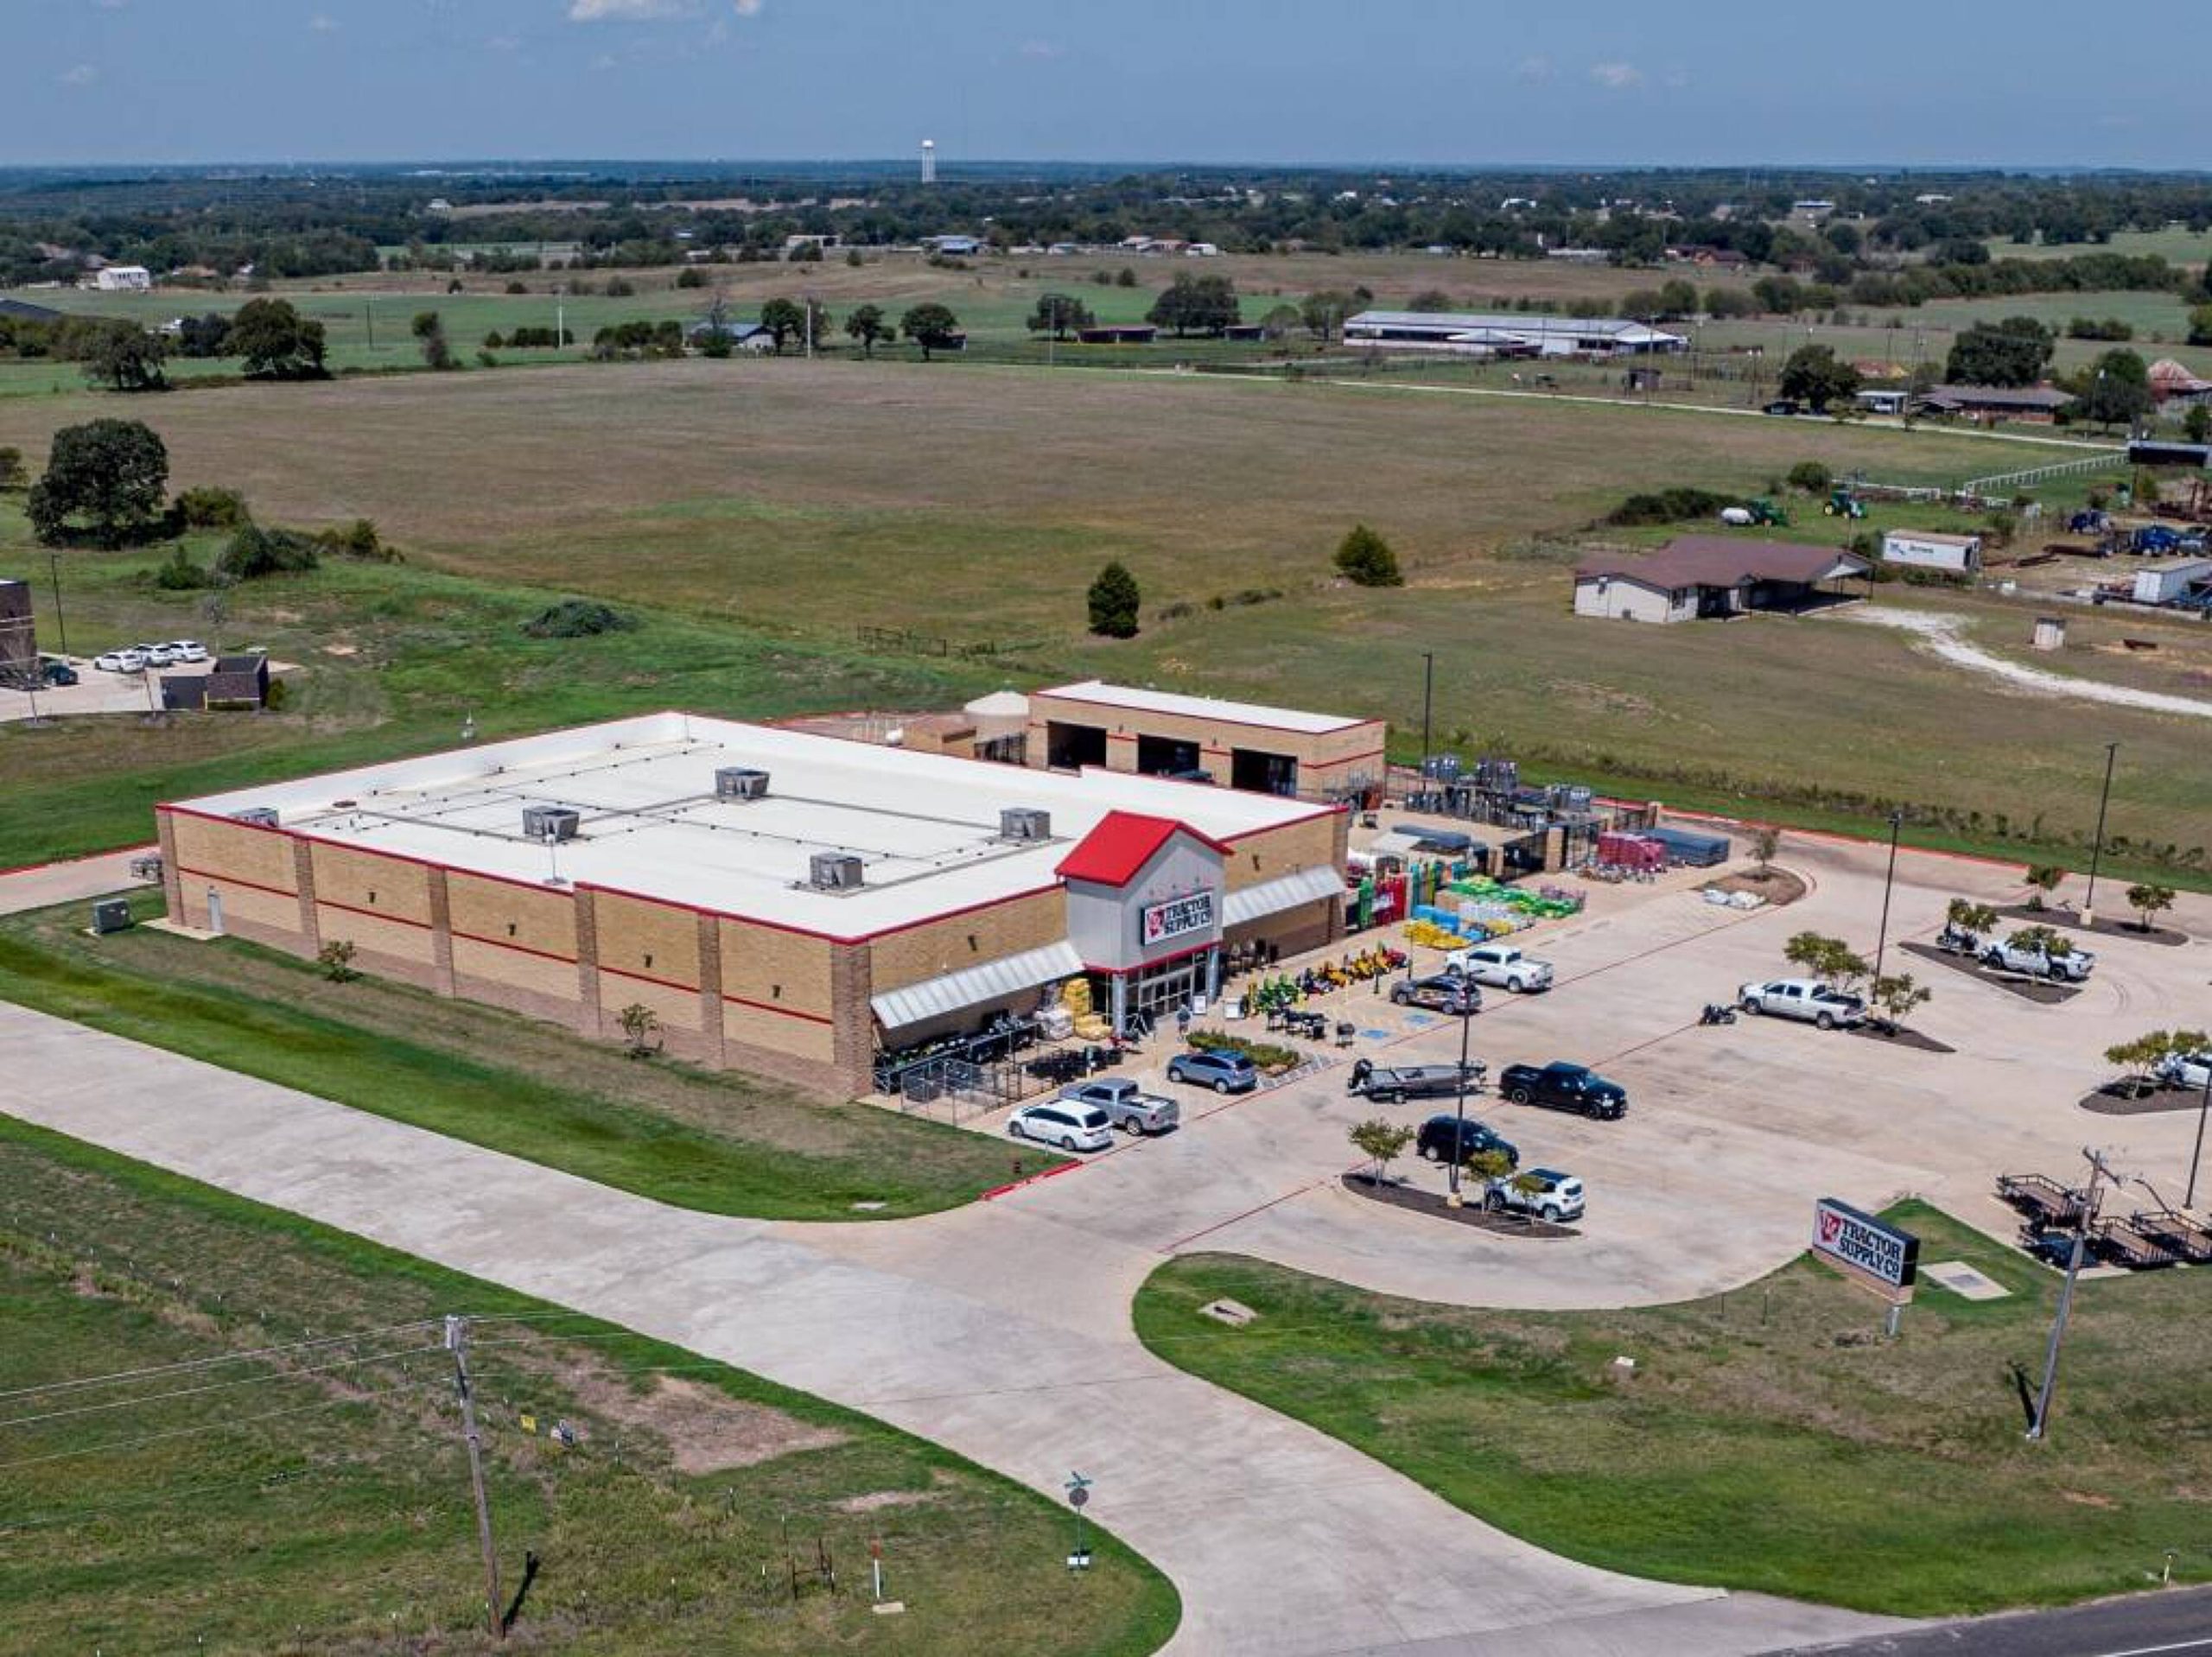 Tractor Supply | Affluent Dallas suburb | High growth area